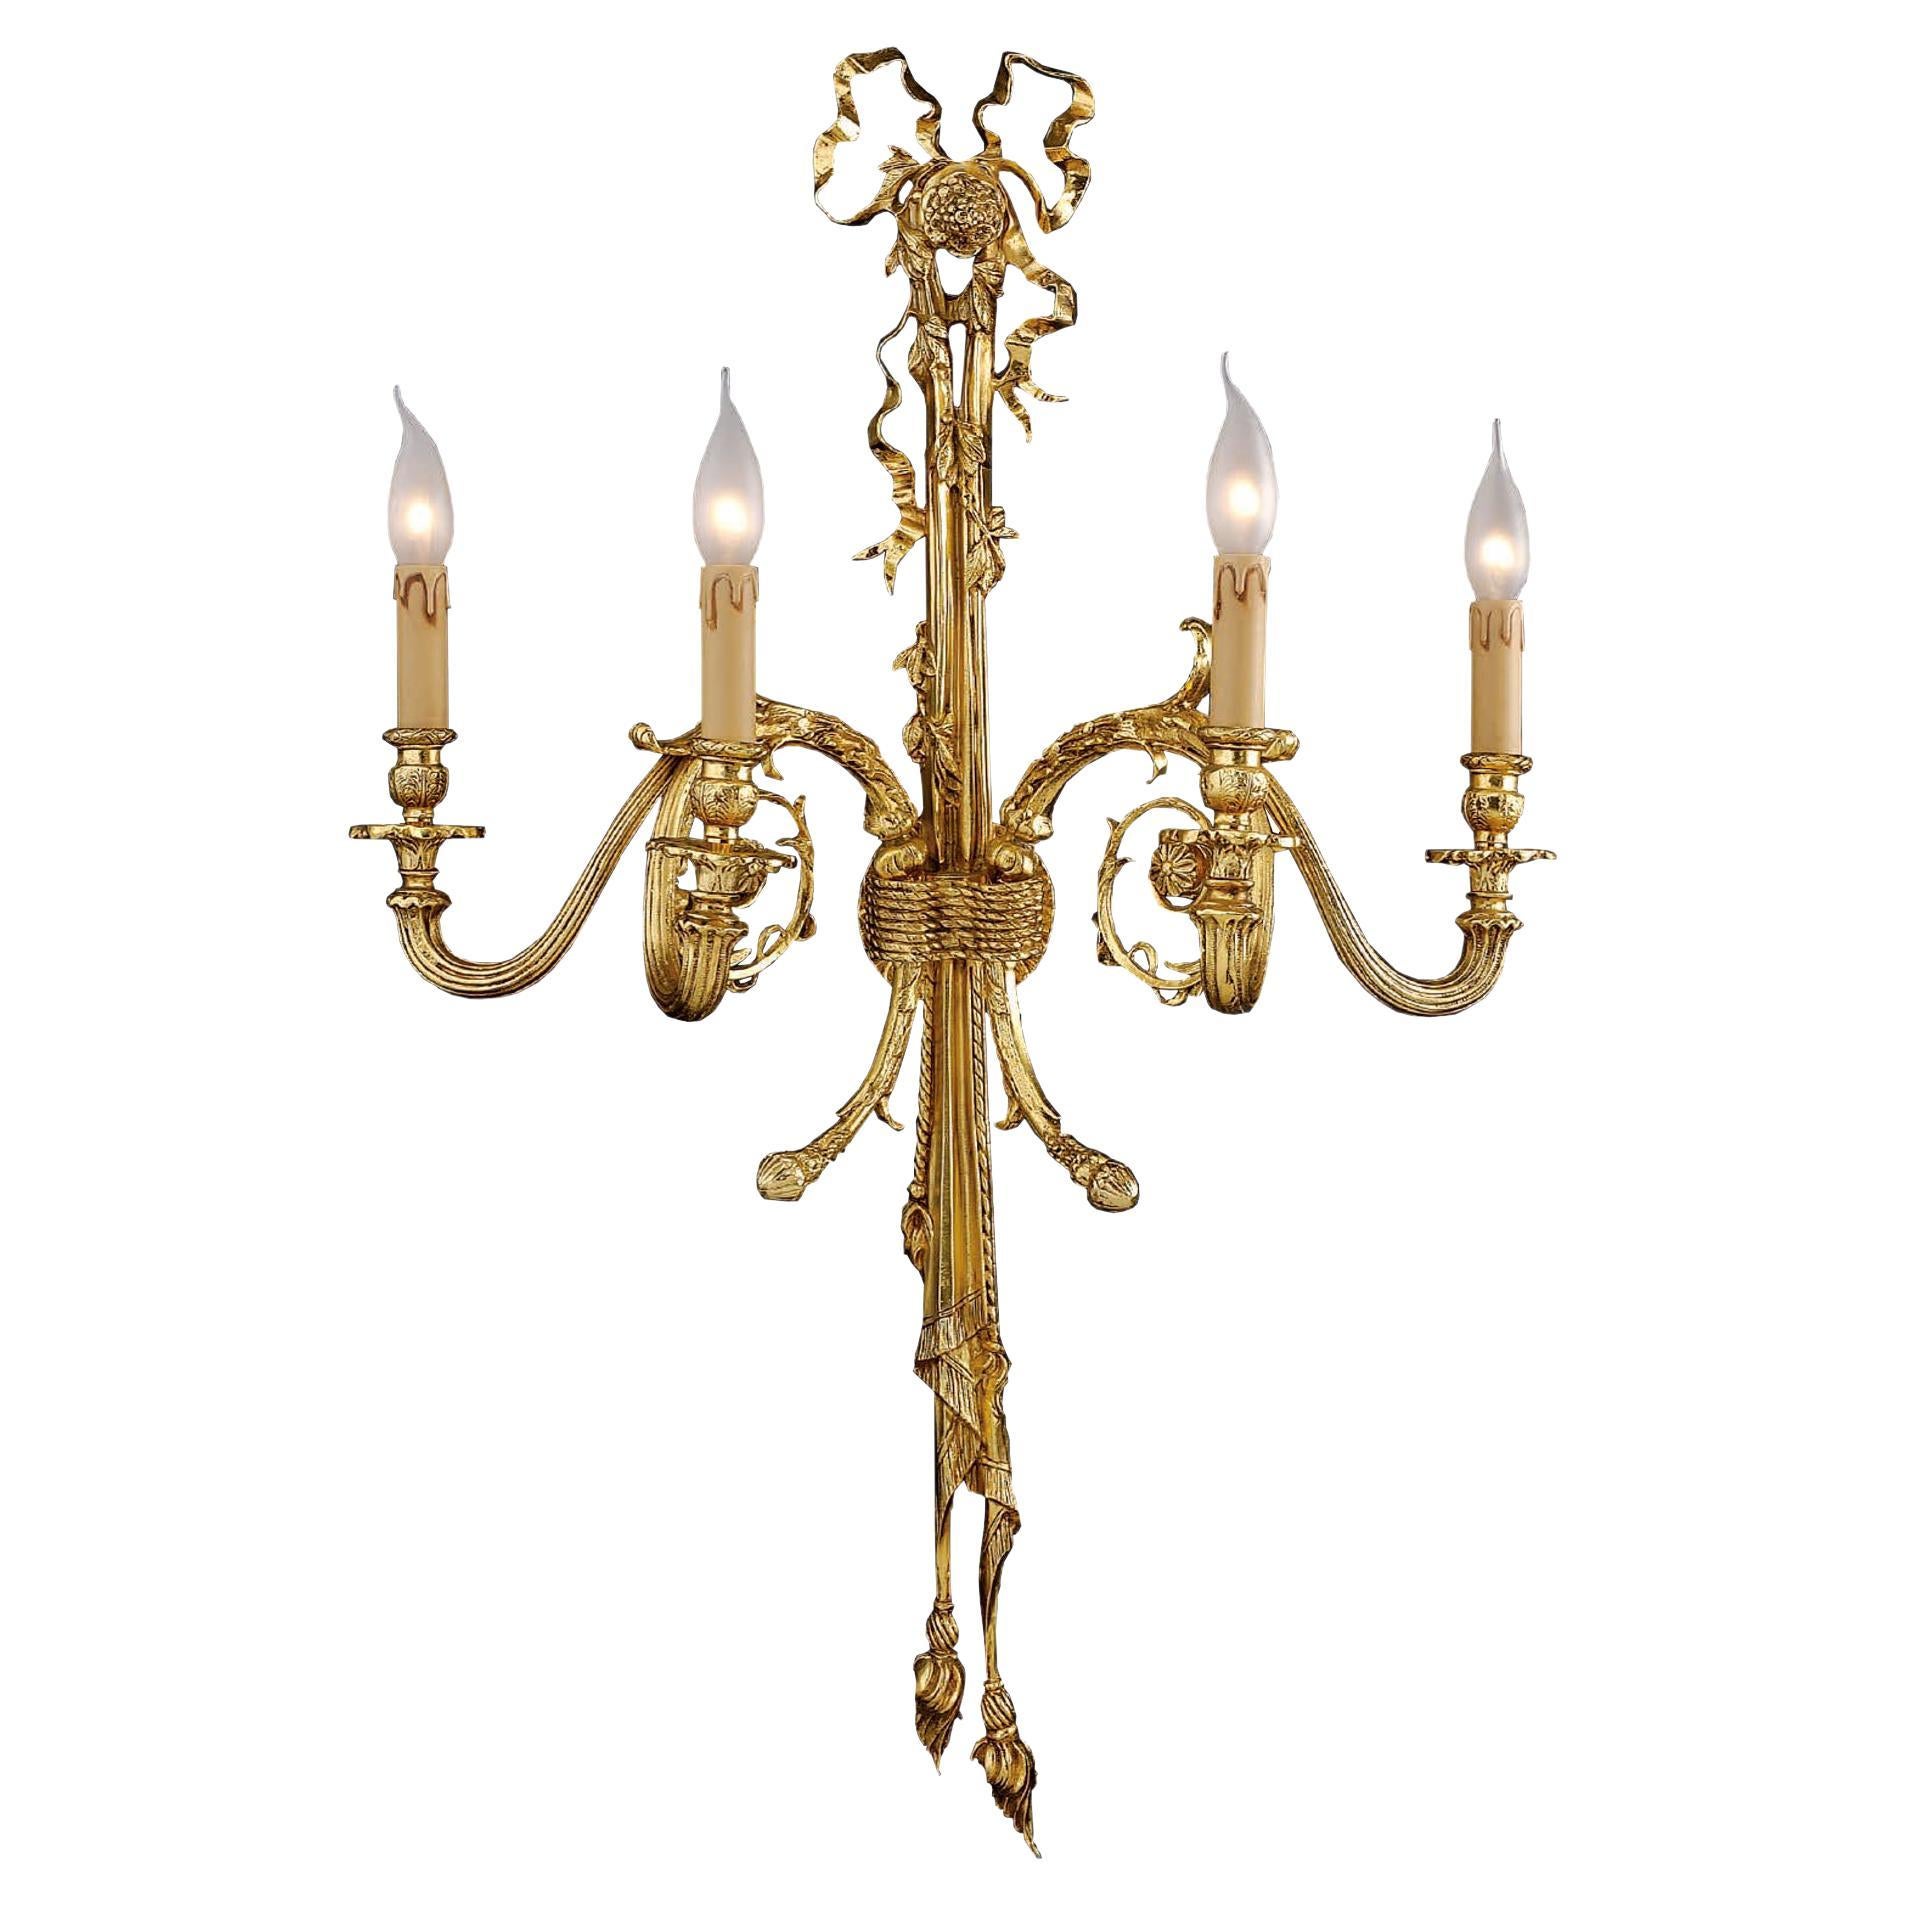 4 Lights Artistic Casting Wall Sconce in 24kt Antique Gold Finish by Modenese